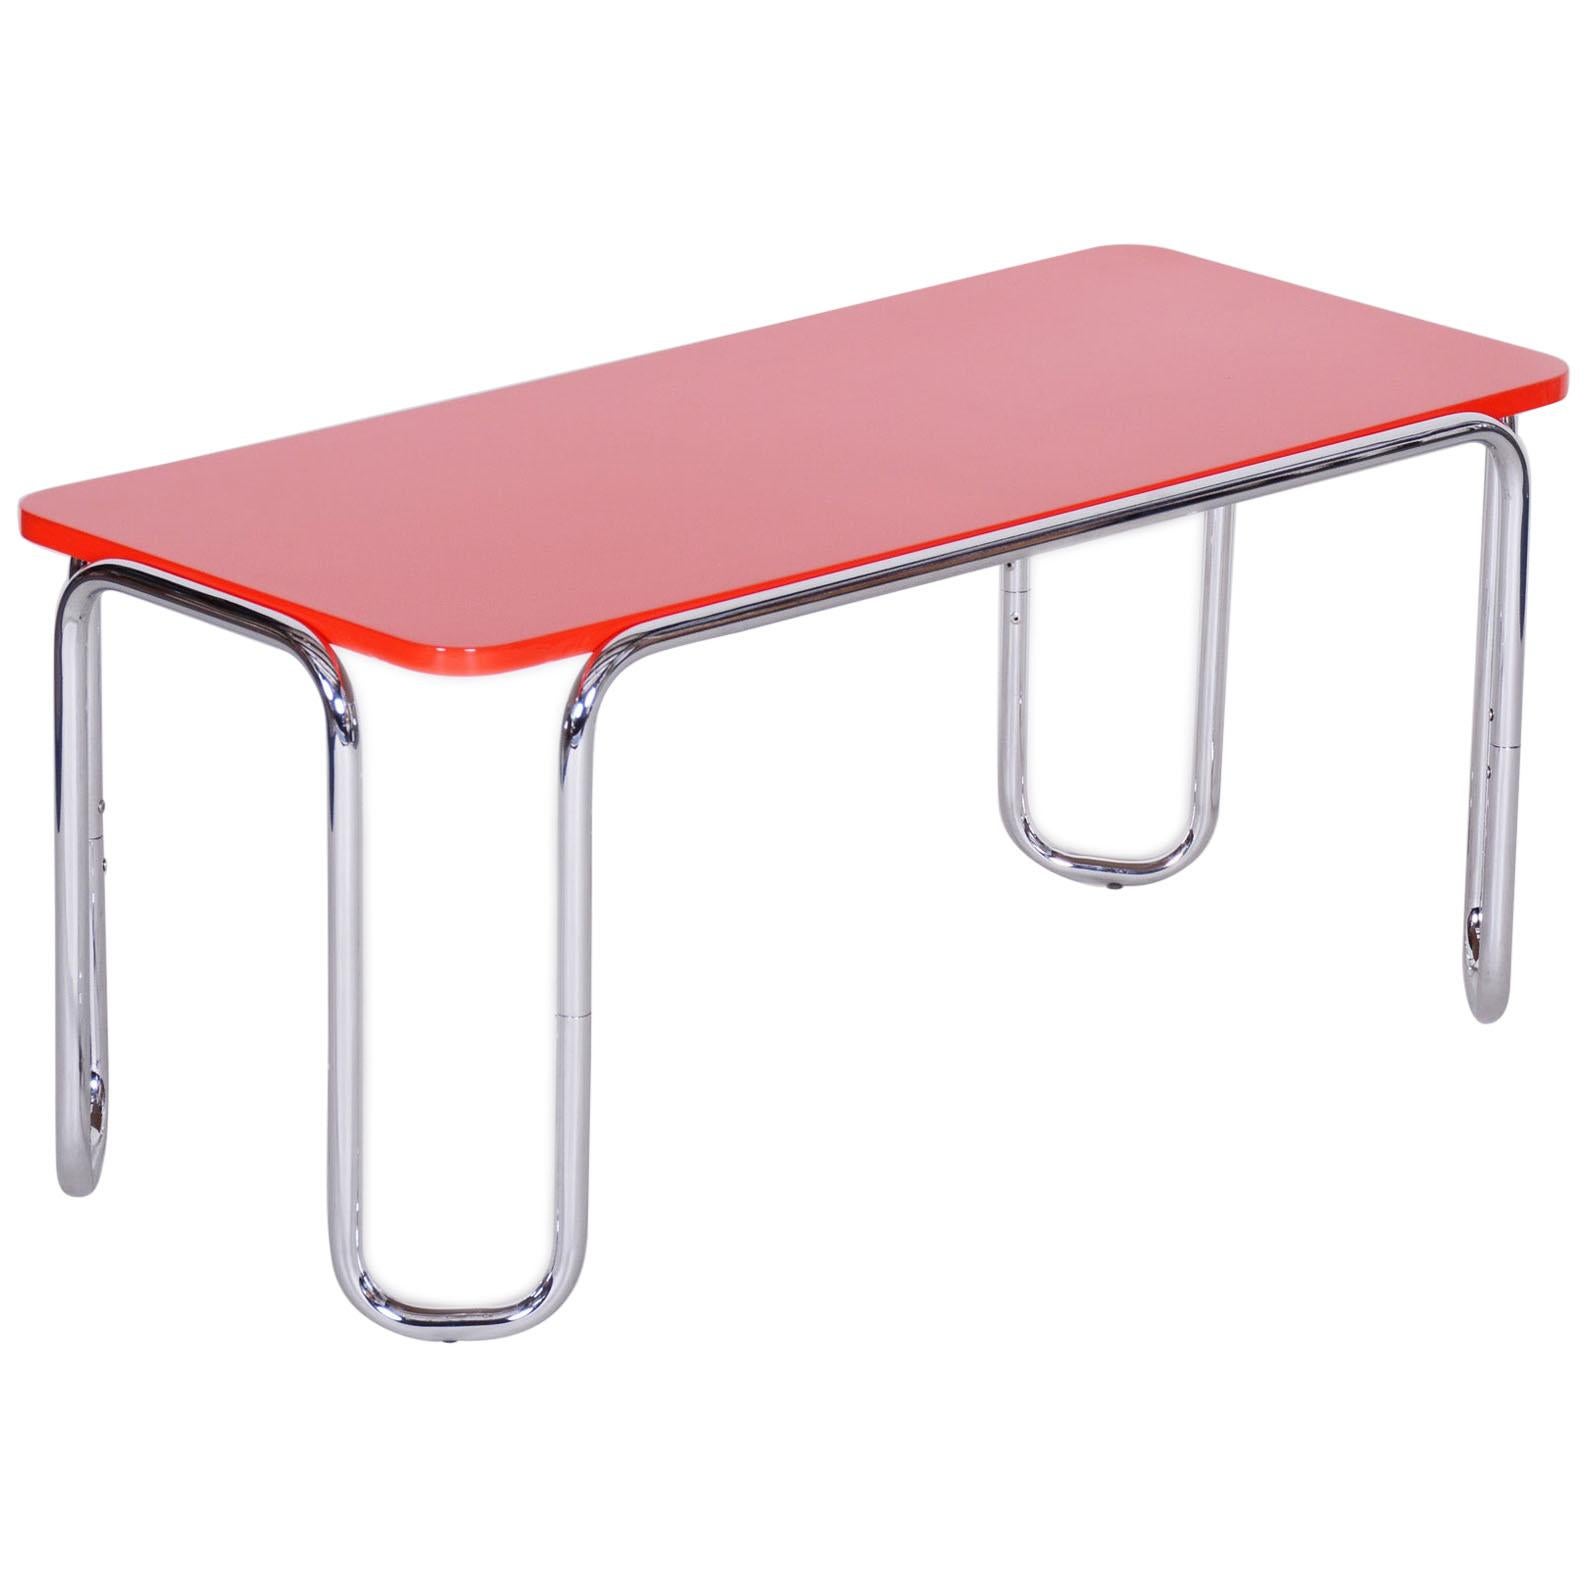 20th Century Small Red Czech Chrome Bauhaus Table by Kovona, 1950s For Sale